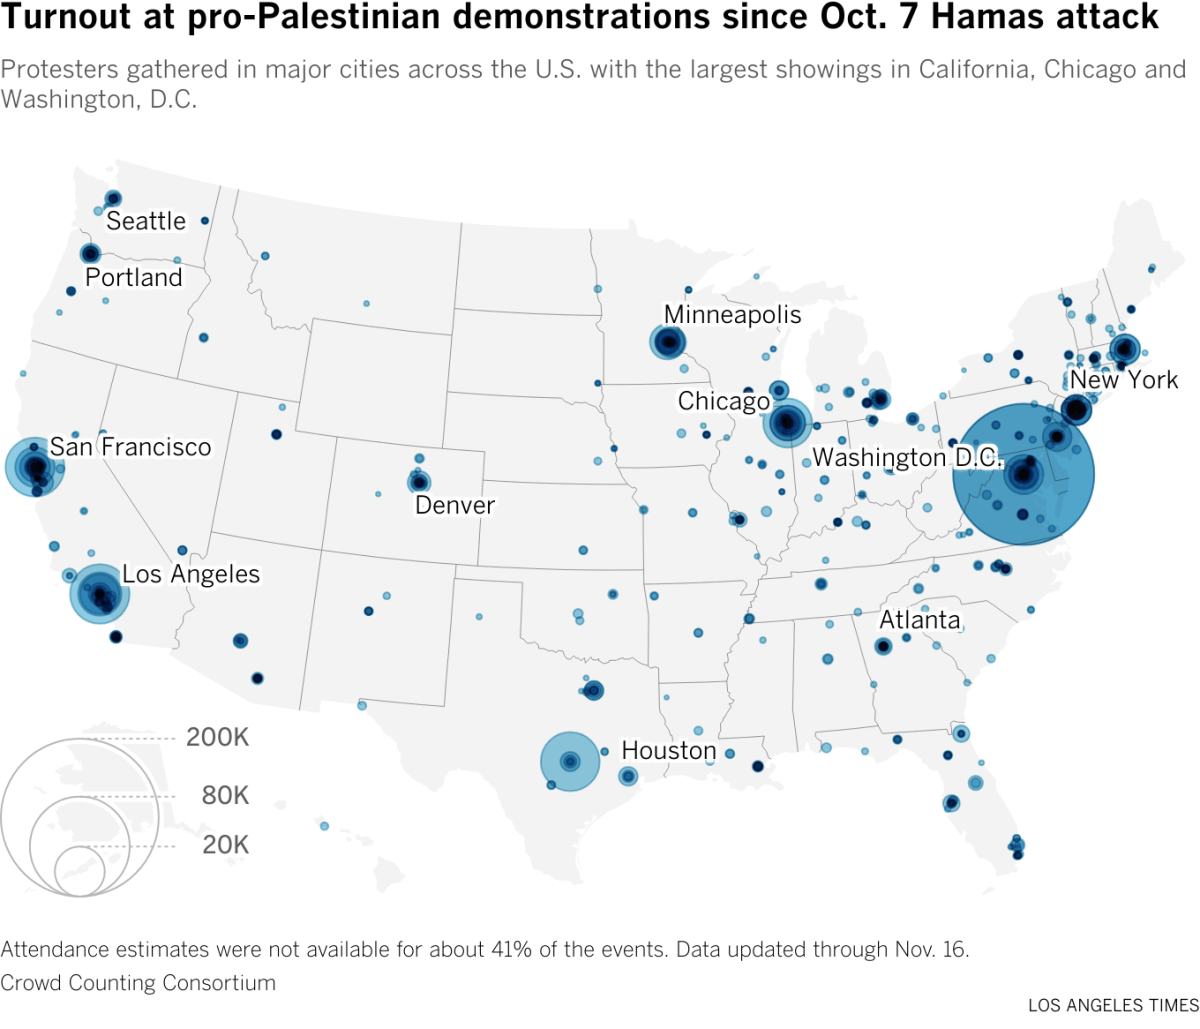 A map showing circles scaled proportionally to the estimated crowd sizes at pro-Palestinian events across the U.S. since Oct. 7.